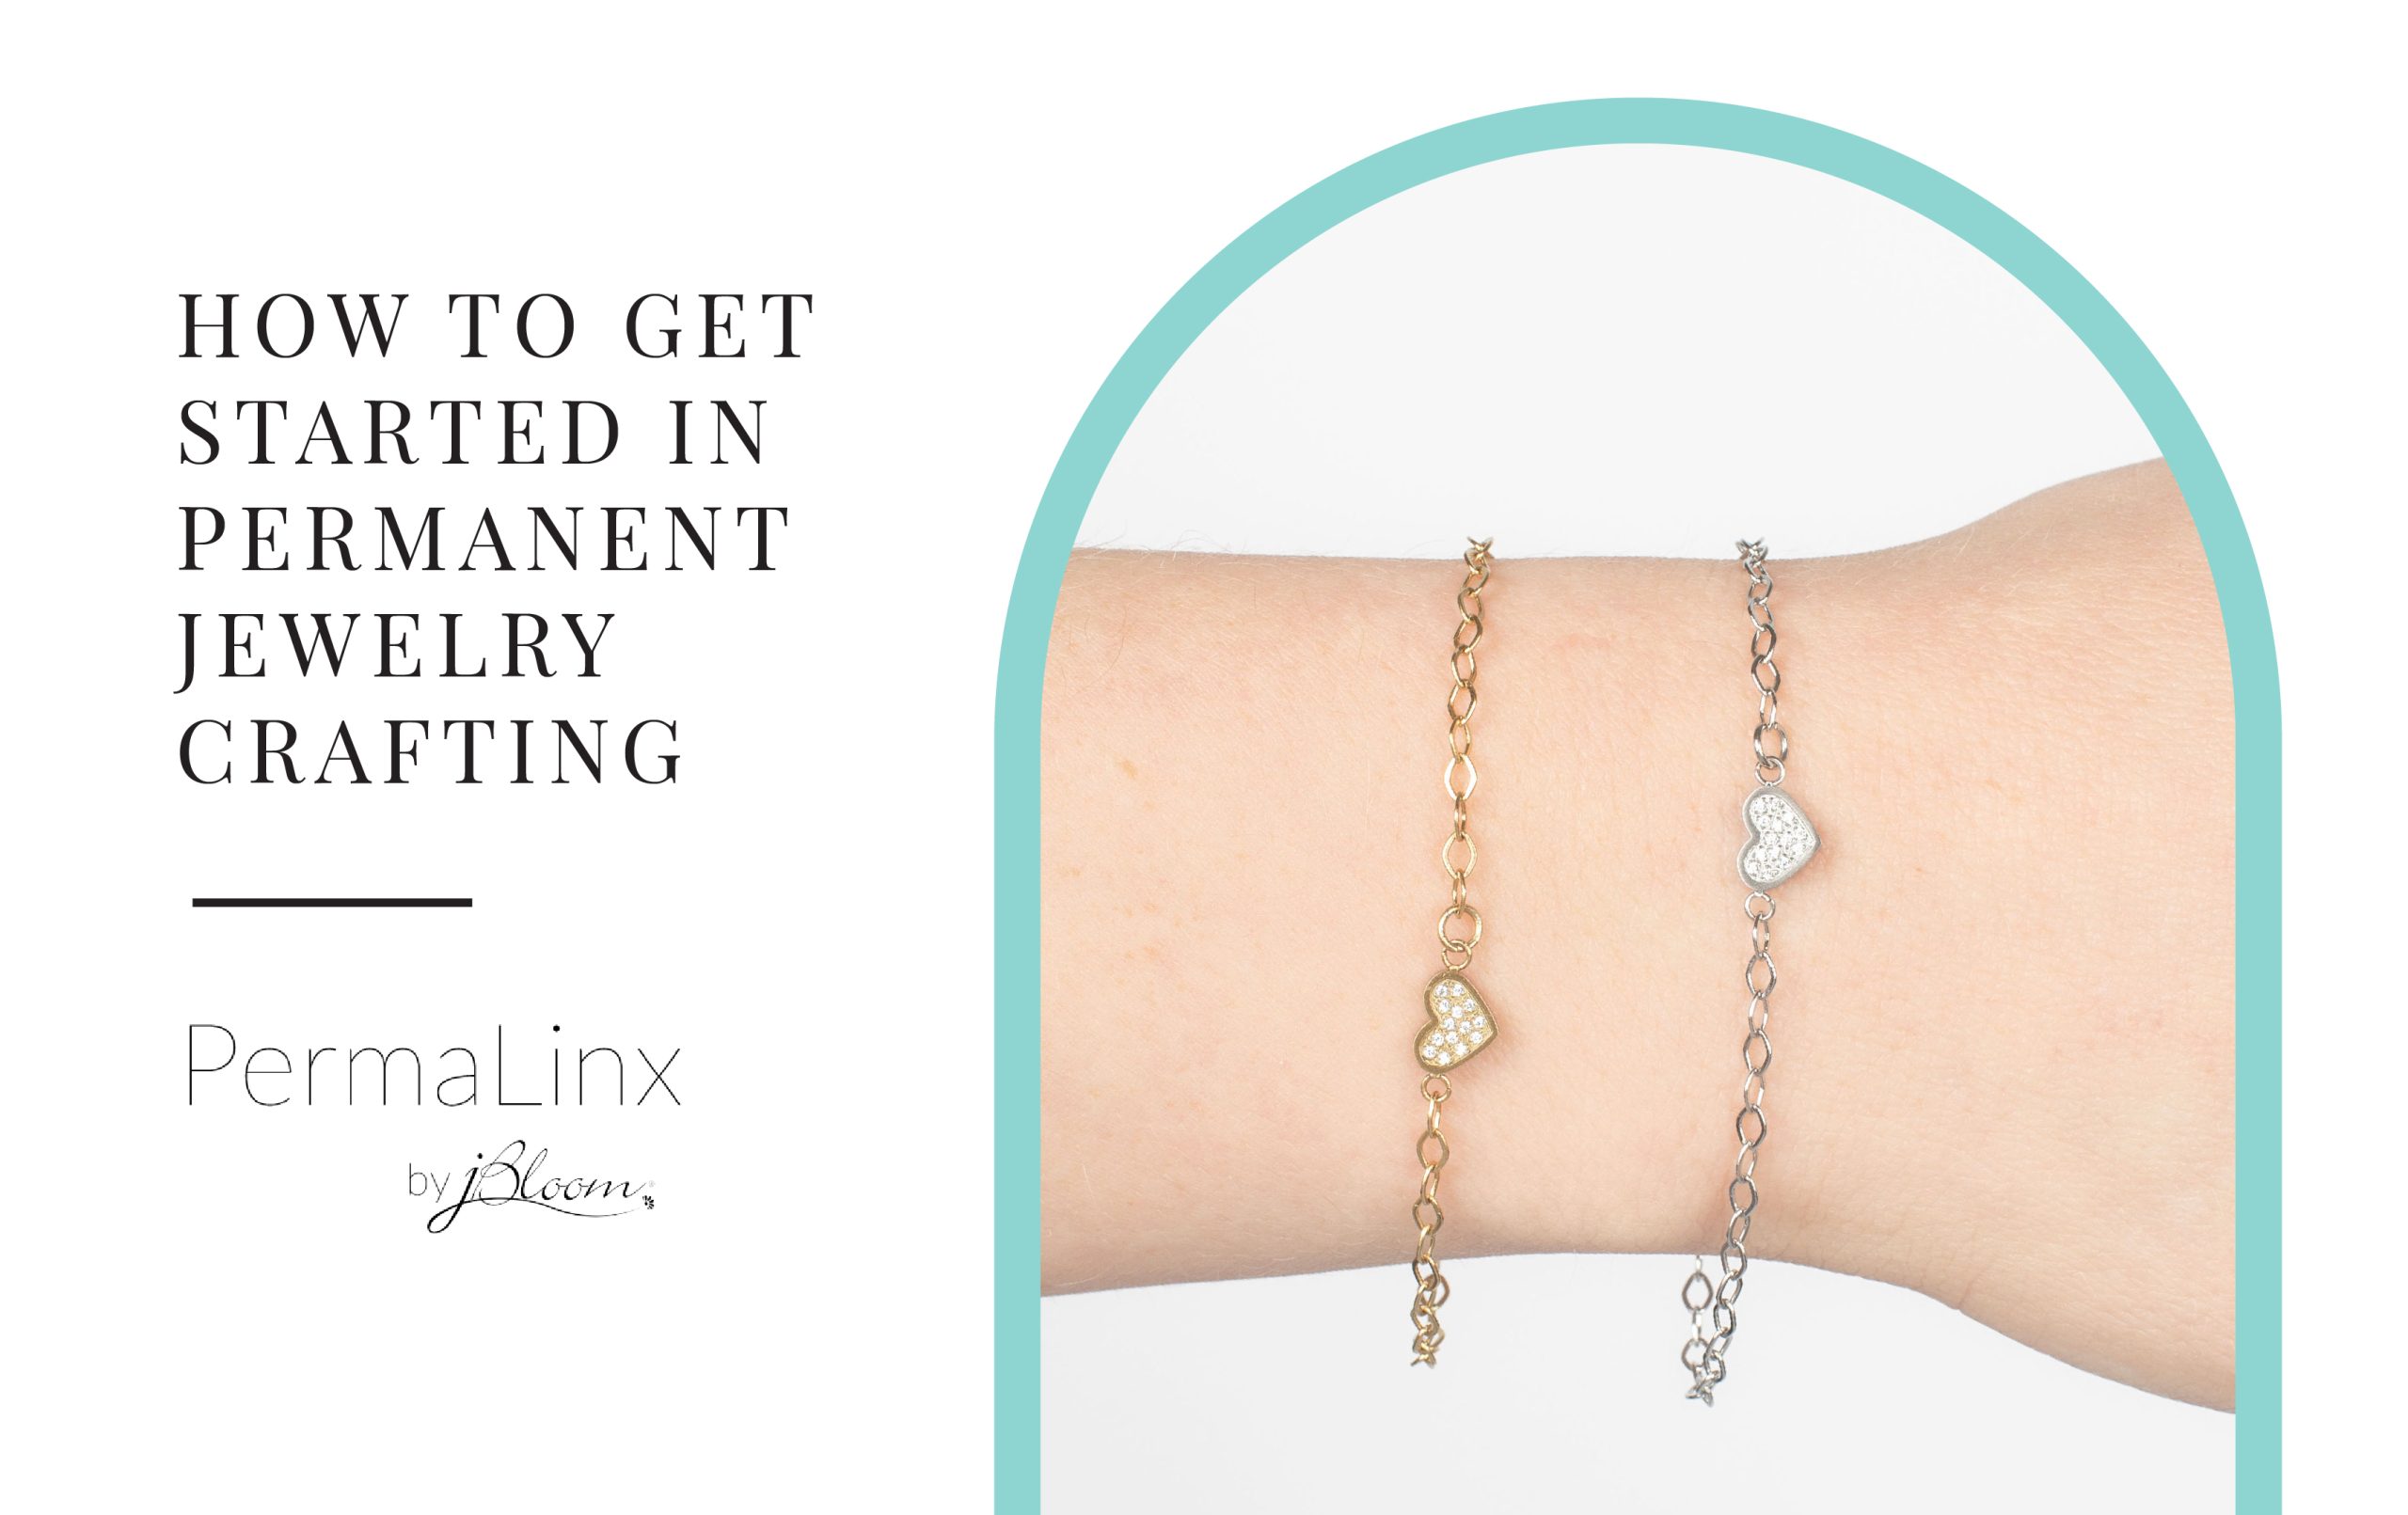 How to Get Started in Permanent Jewelry